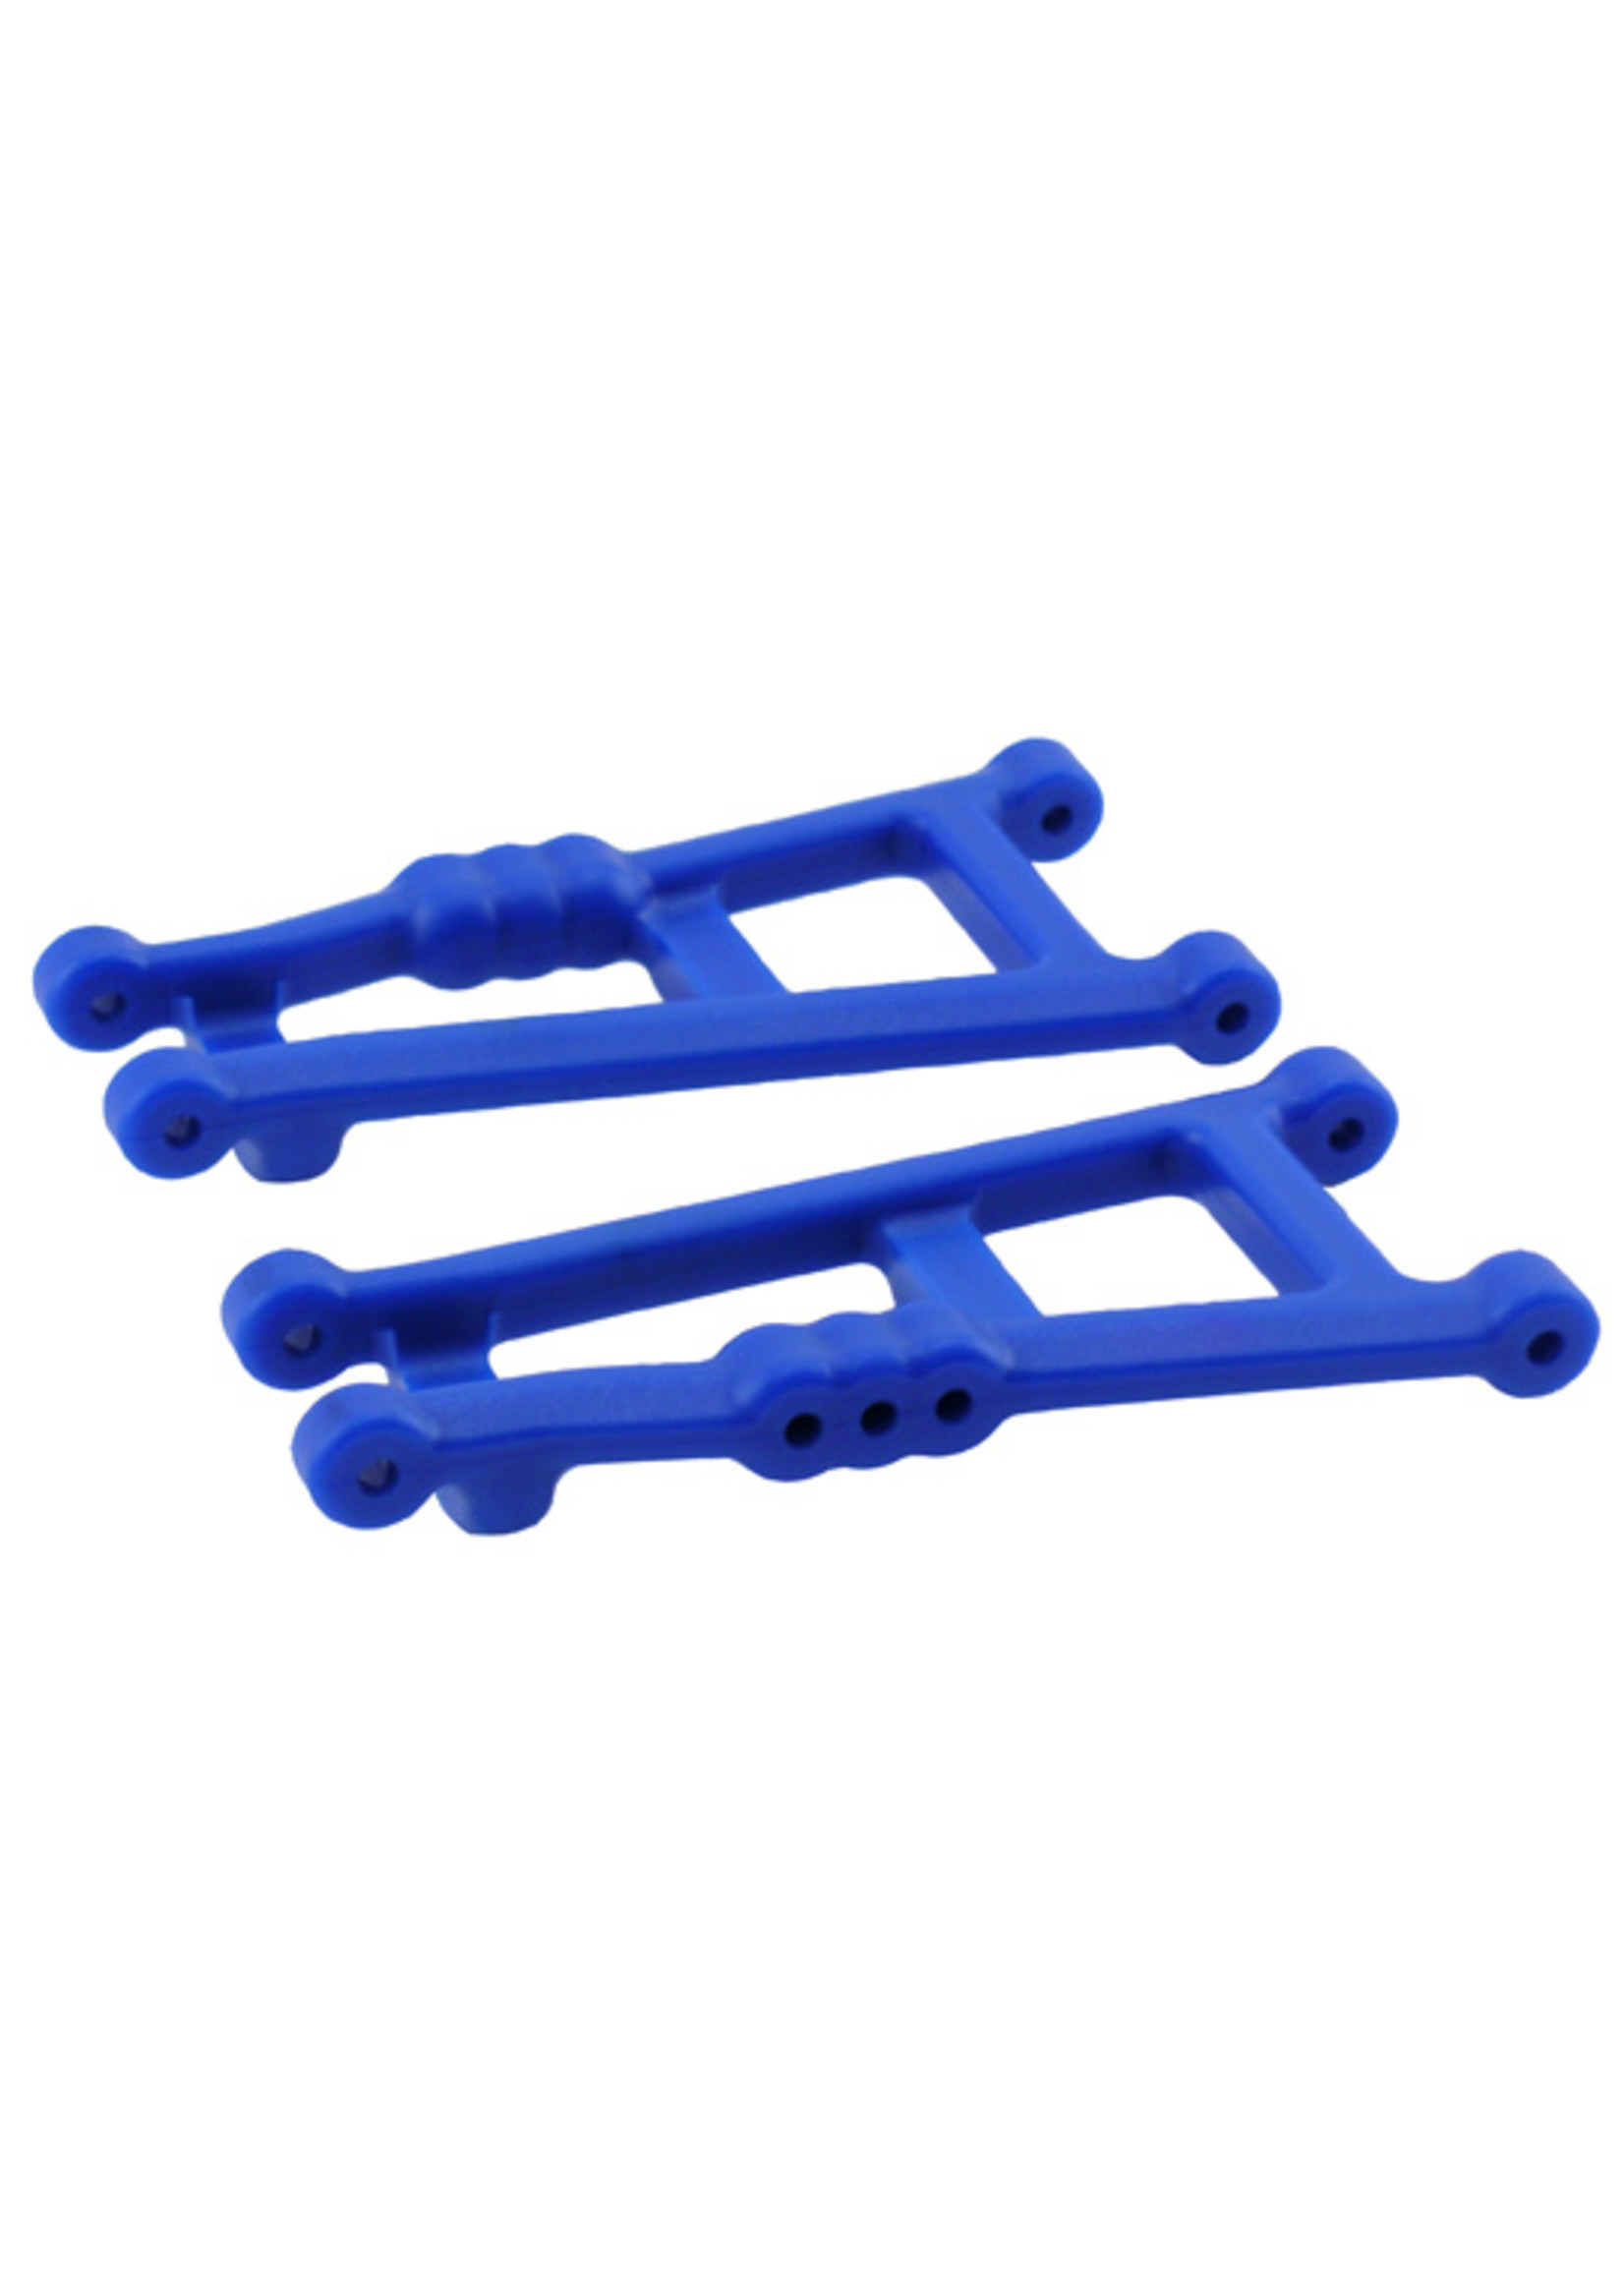 RPM 80185 - Rear A-arms for Rustler, Stampede - Blue